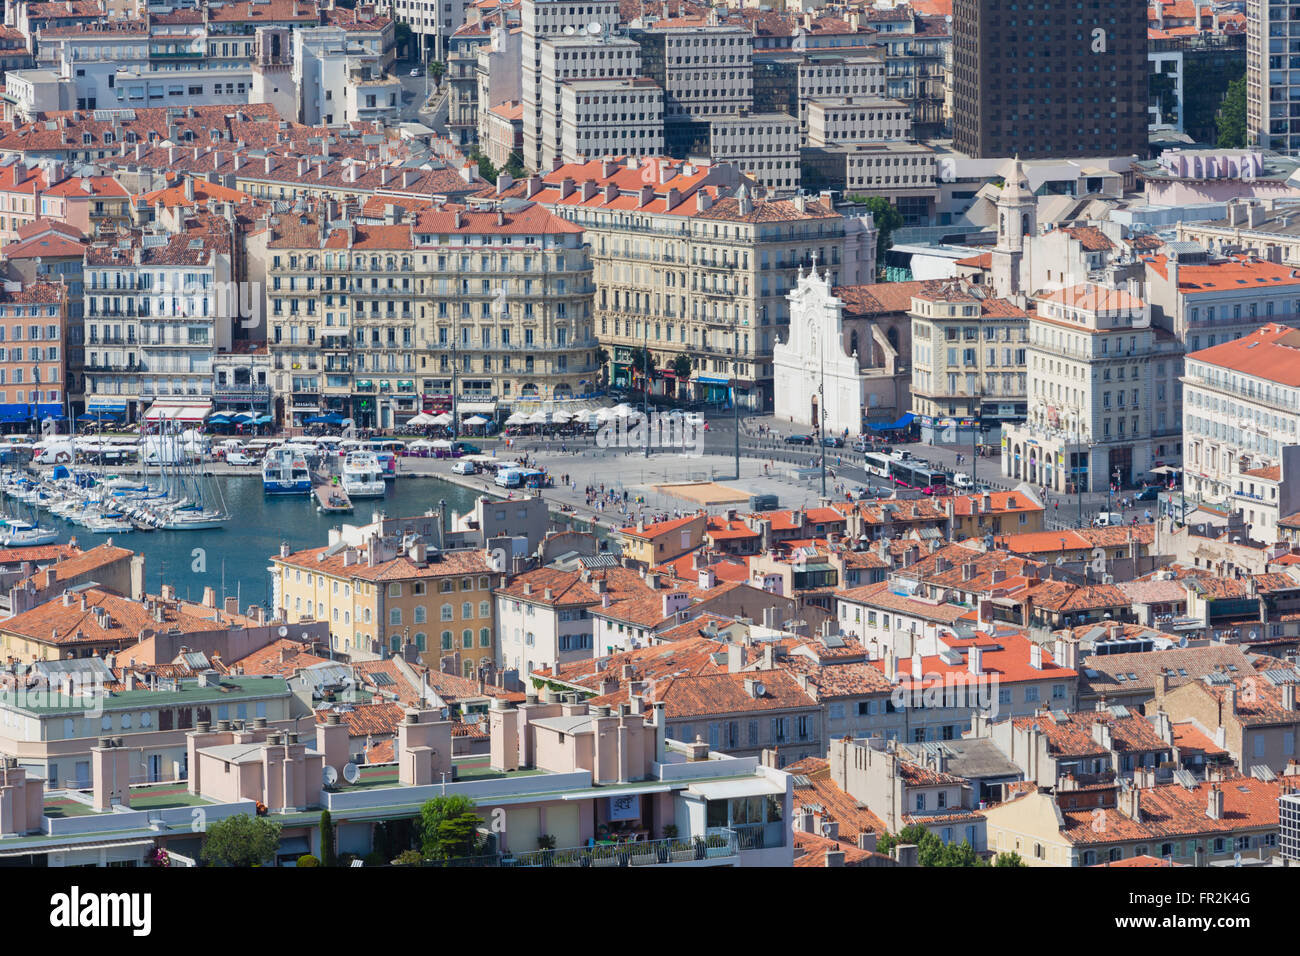 Marseille, Provence-Alpes-Côte d'Azur, France.  High view down onto Vieux-Port, the Old Port, and the city. Stock Photo